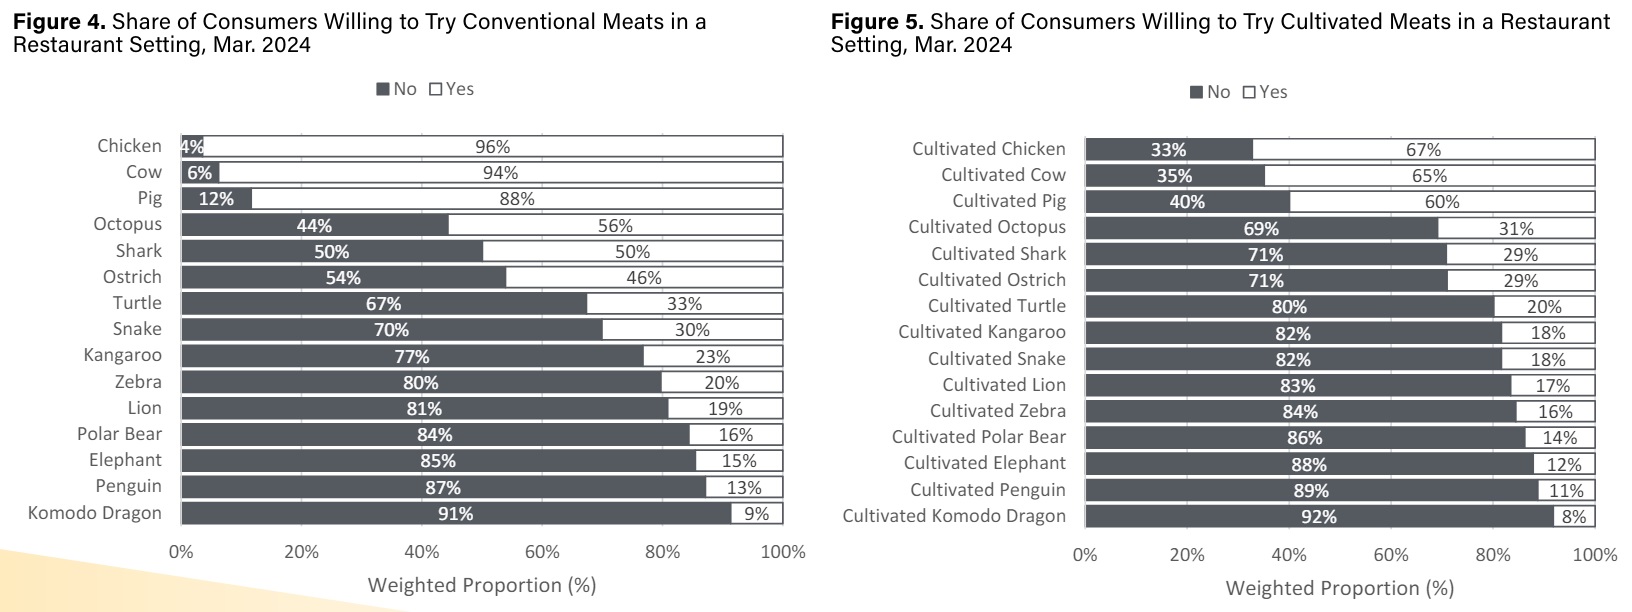 Source: Perdue University's March Consumer Food Insights Survey